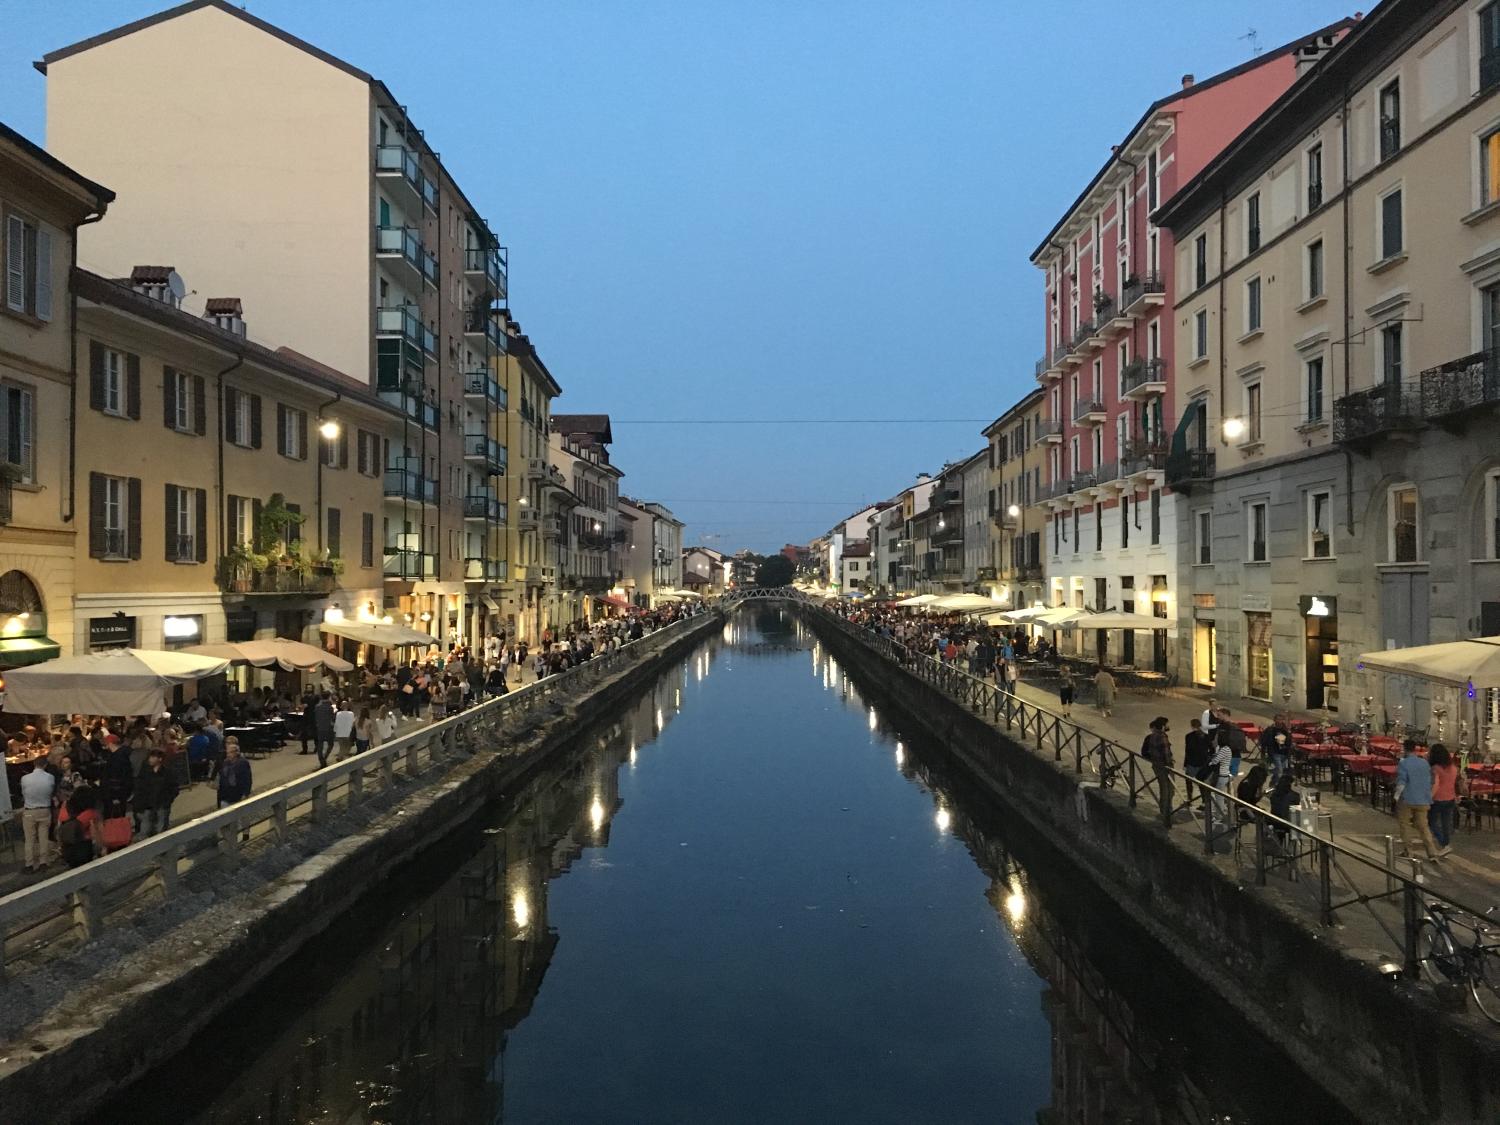 Milan, Italy’s revitalizing Navigli canal district (Photo taken by Alaina Harkness, September 2016)